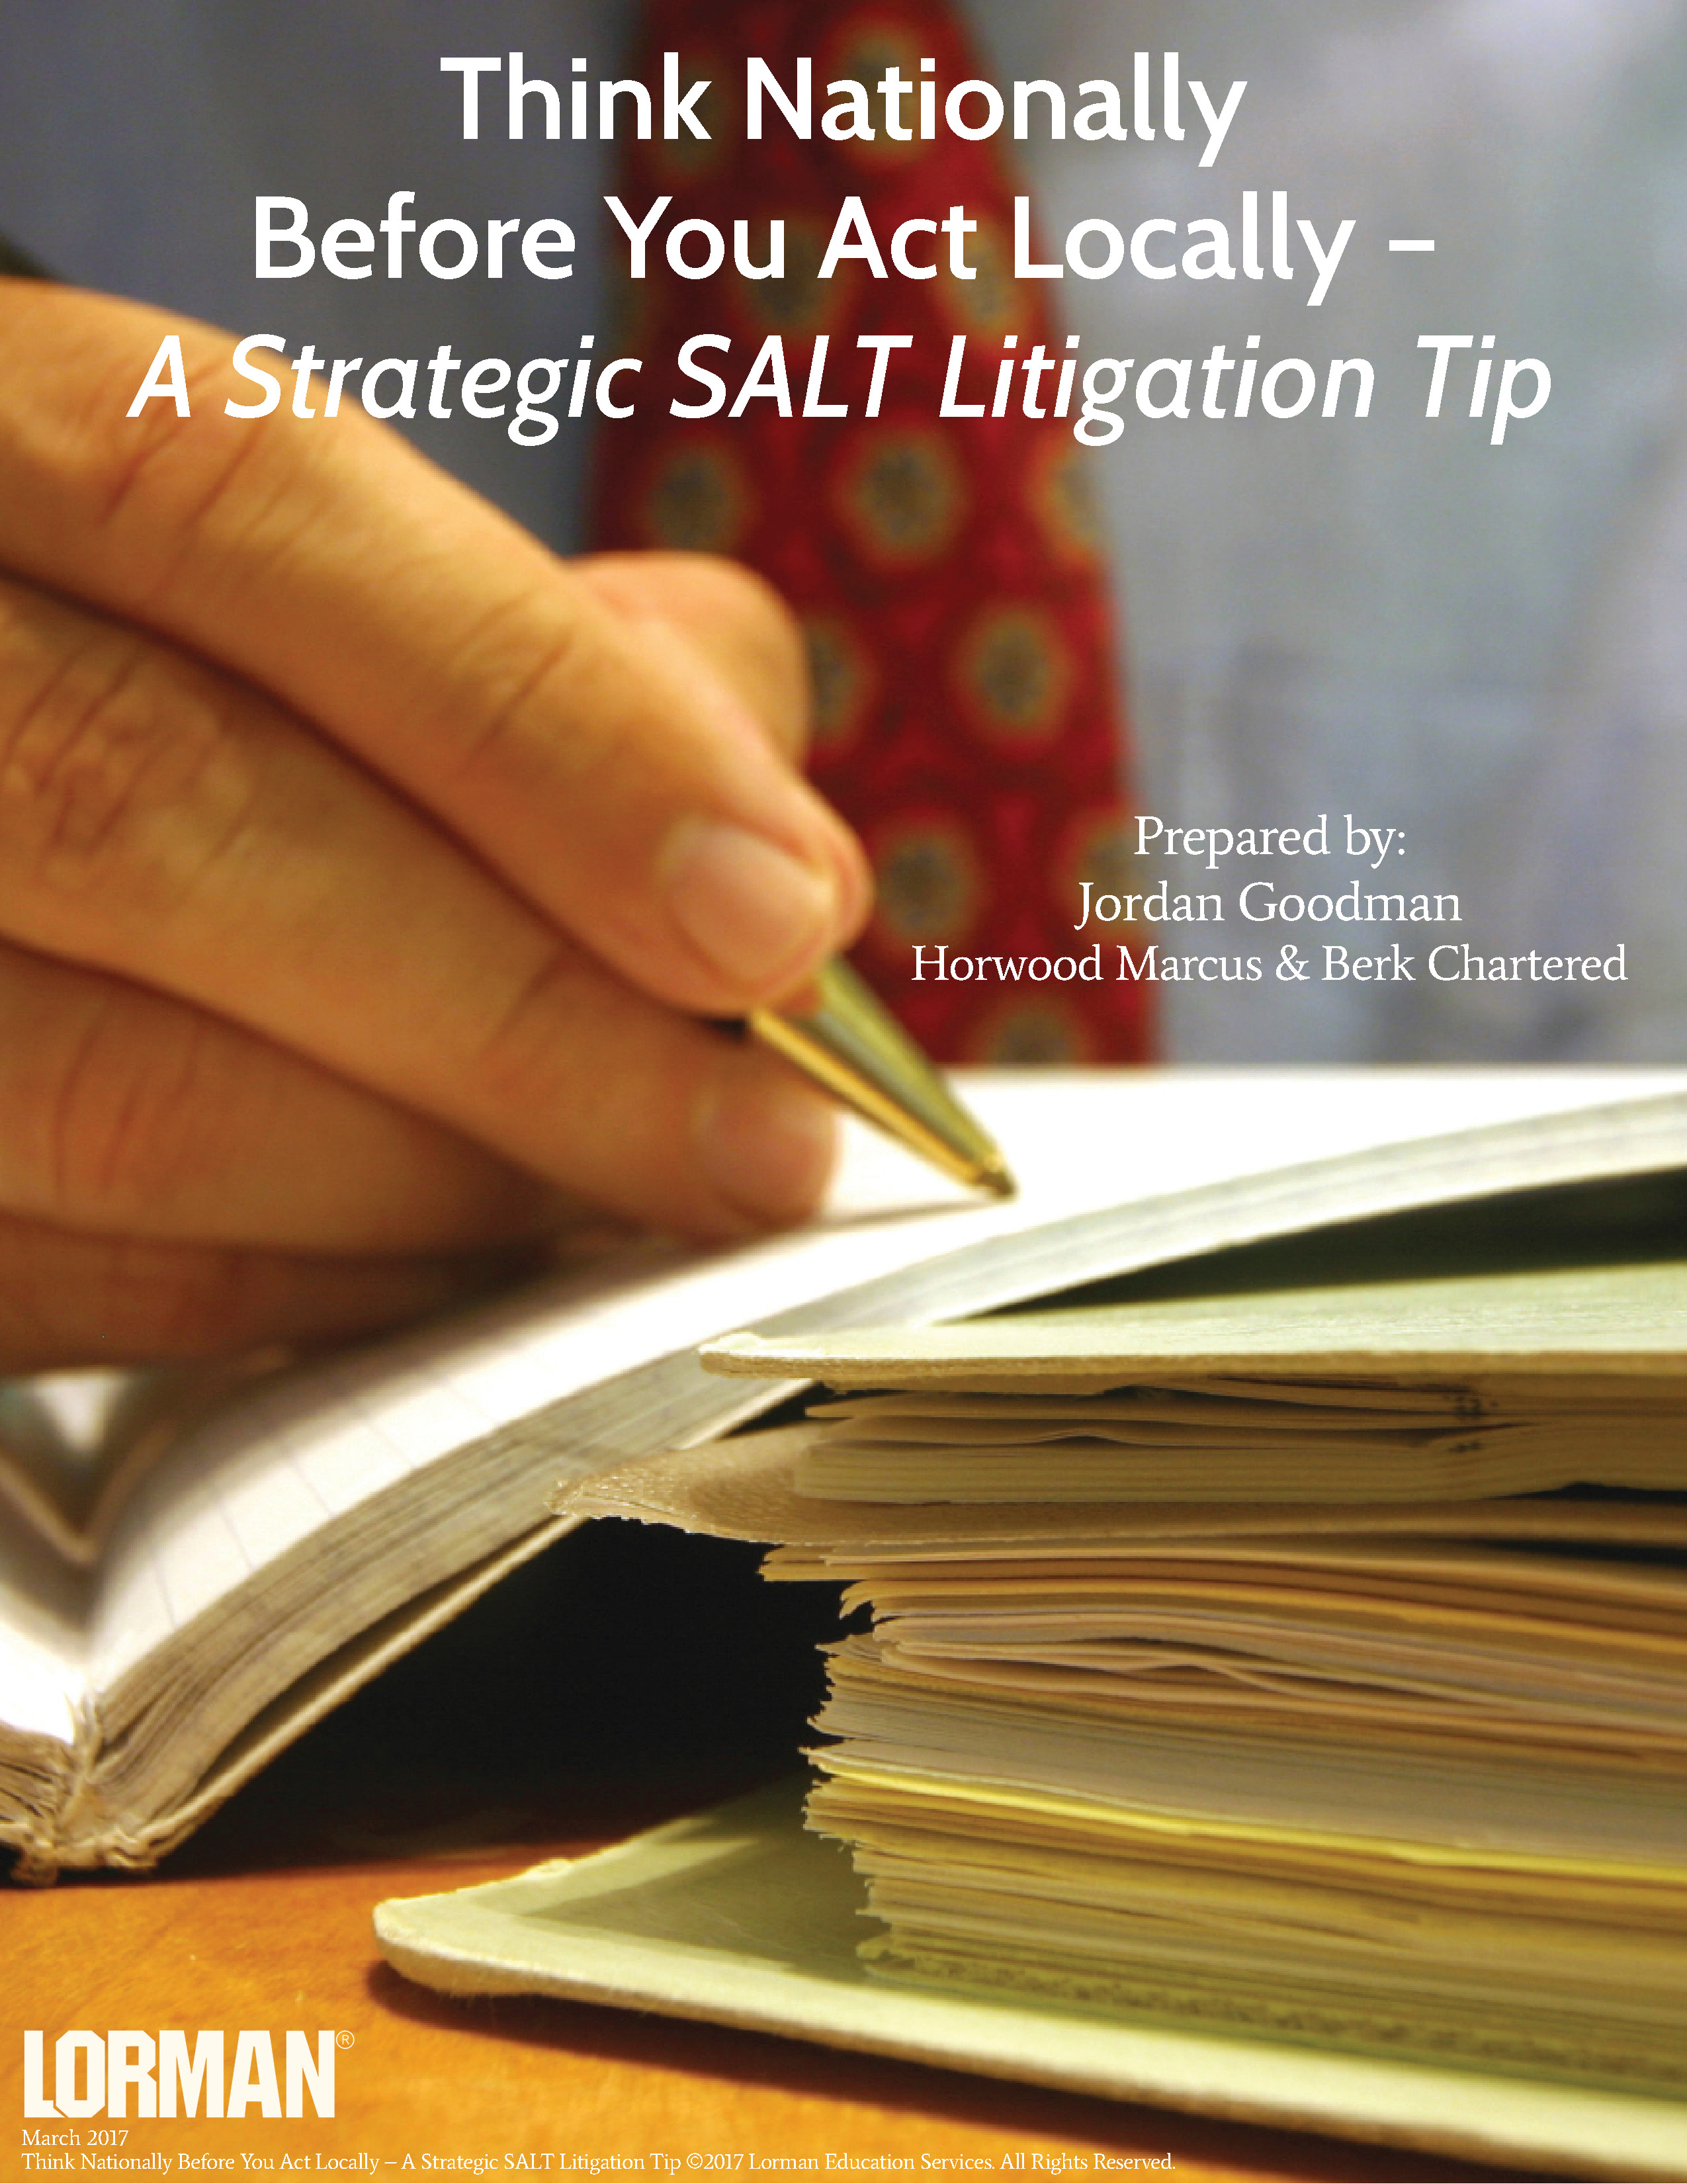 Think Nationally Before You Act Locally - A Strategic SALT Litigation Tip